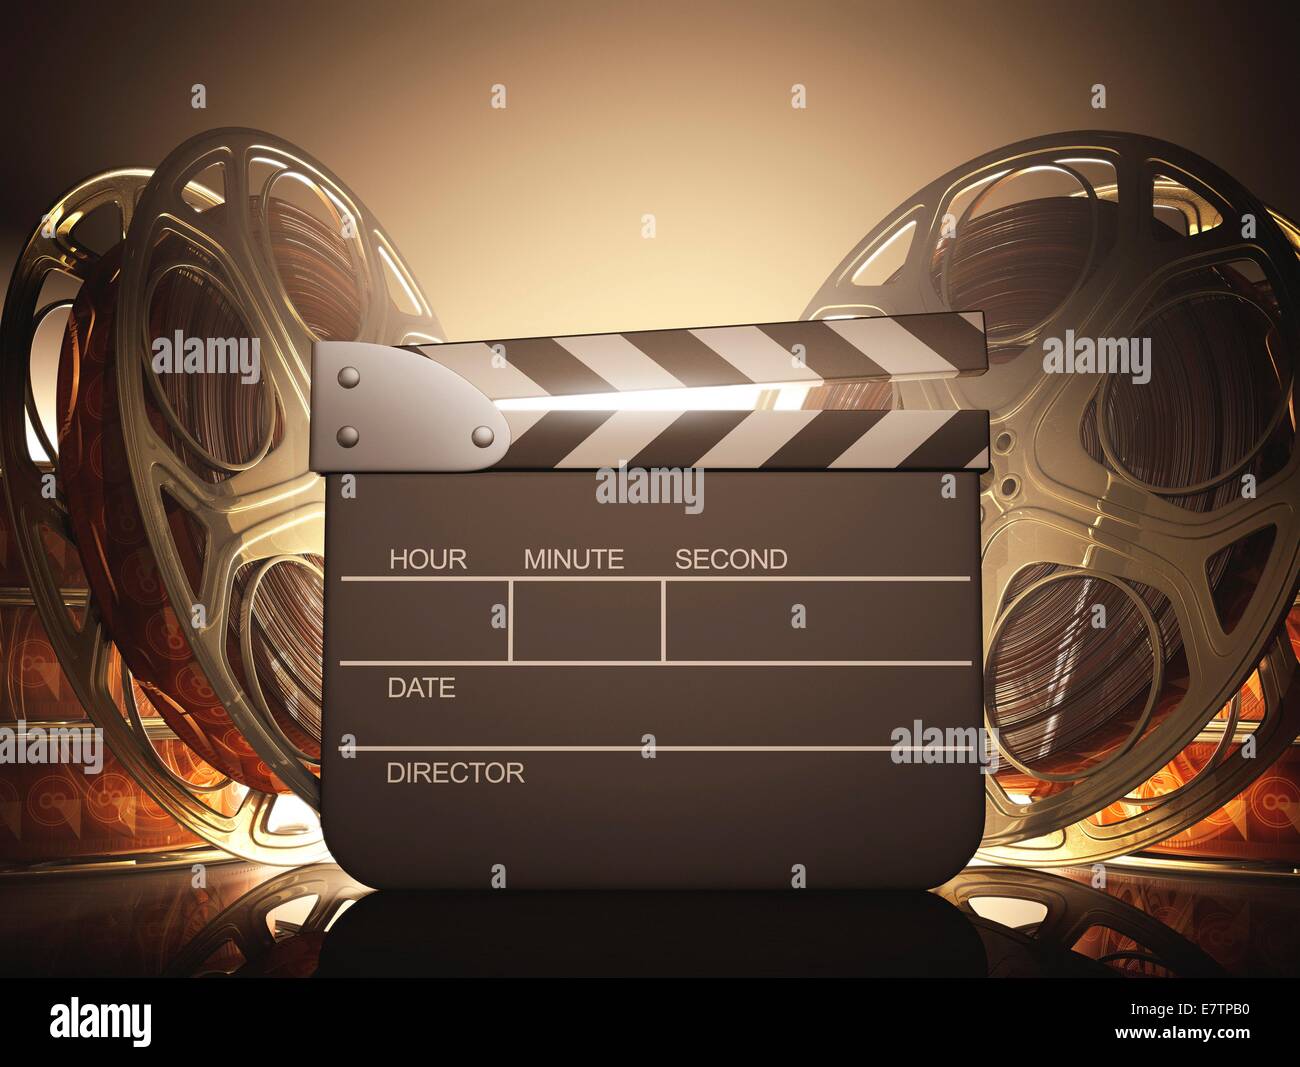 Clapperboard and cinema film reel, computer artwork. Stock Photo